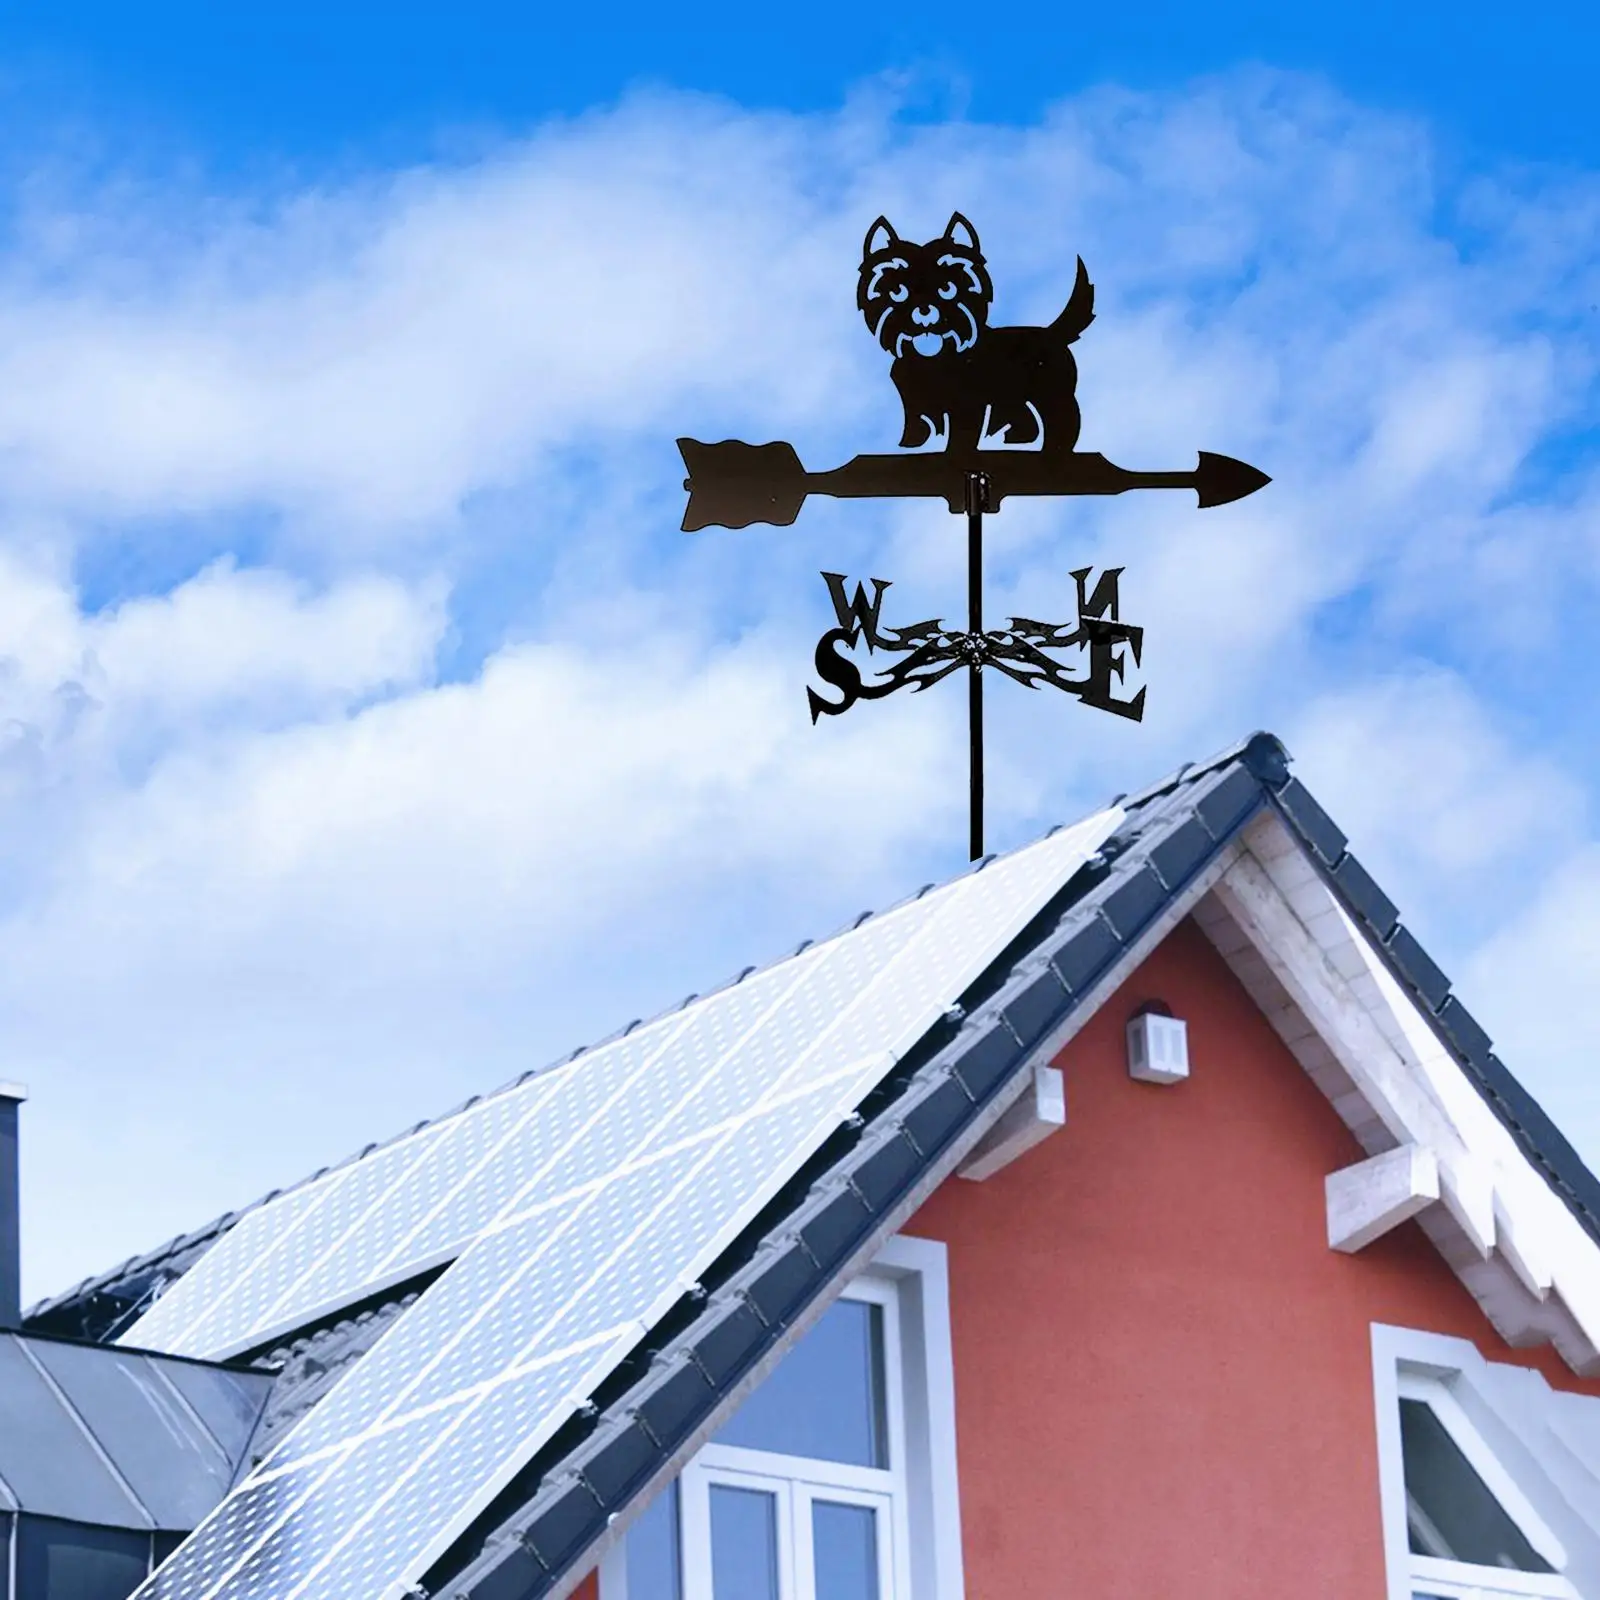 Classic Weather Vane with Silhouette Figurine Roof Mount Measuring Tools Wind Direction Indicator for Yard Farm Garage Ornament